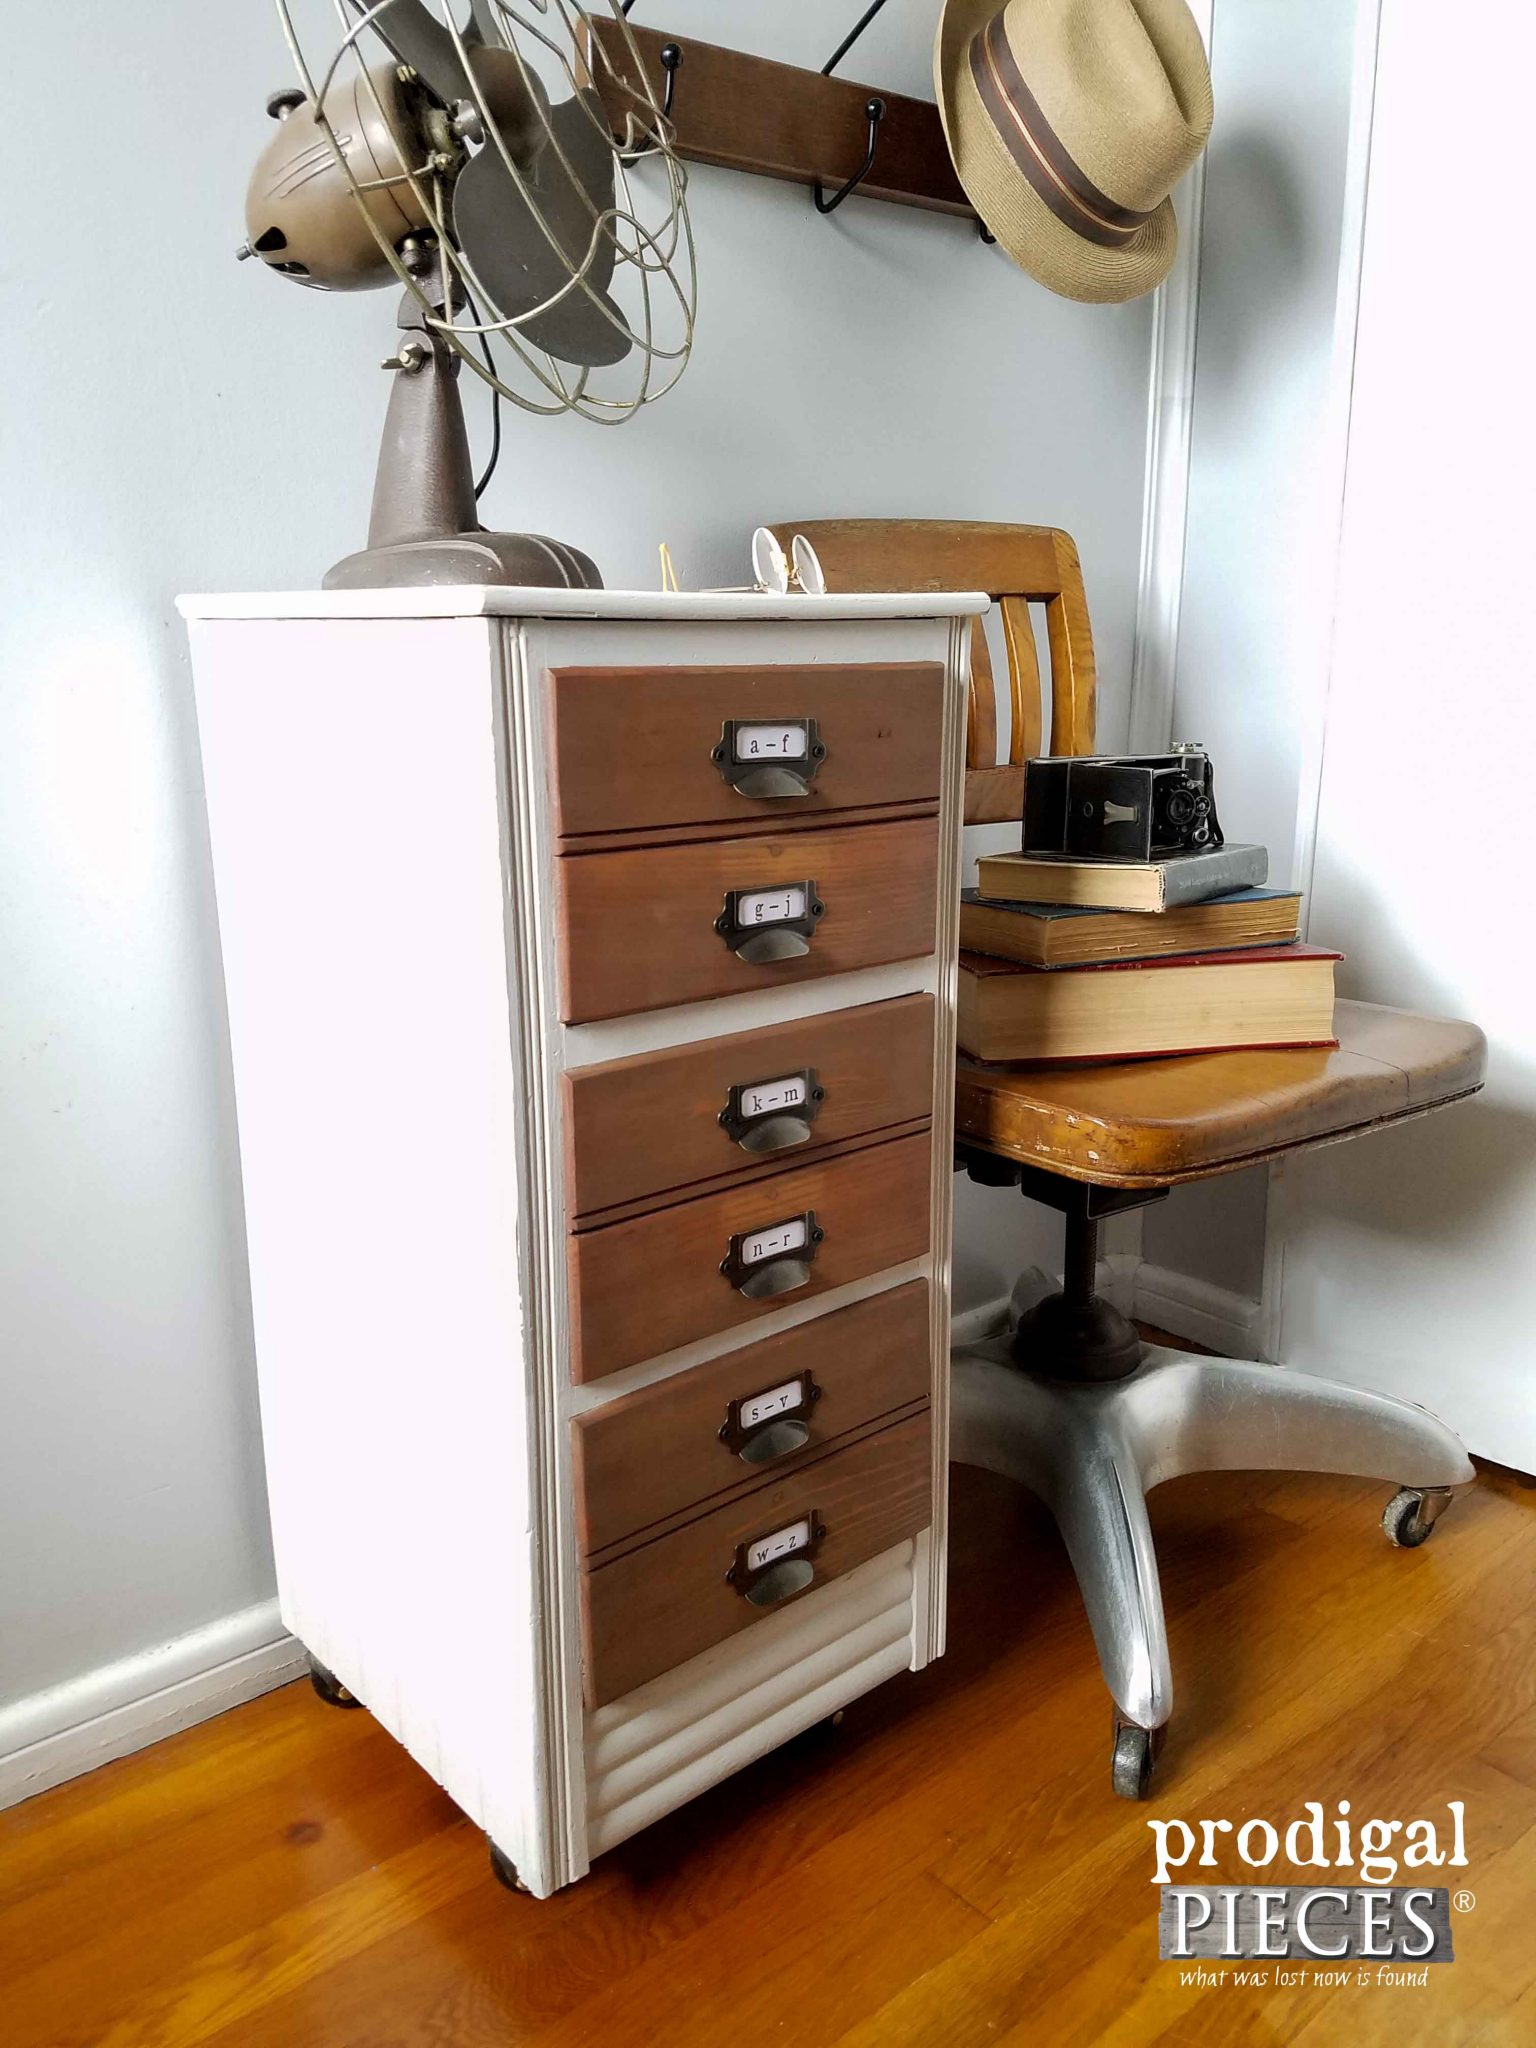 Industrial Style Apothecary Cabinet DIY by Prodigal Pieces | prodigalpieces.com